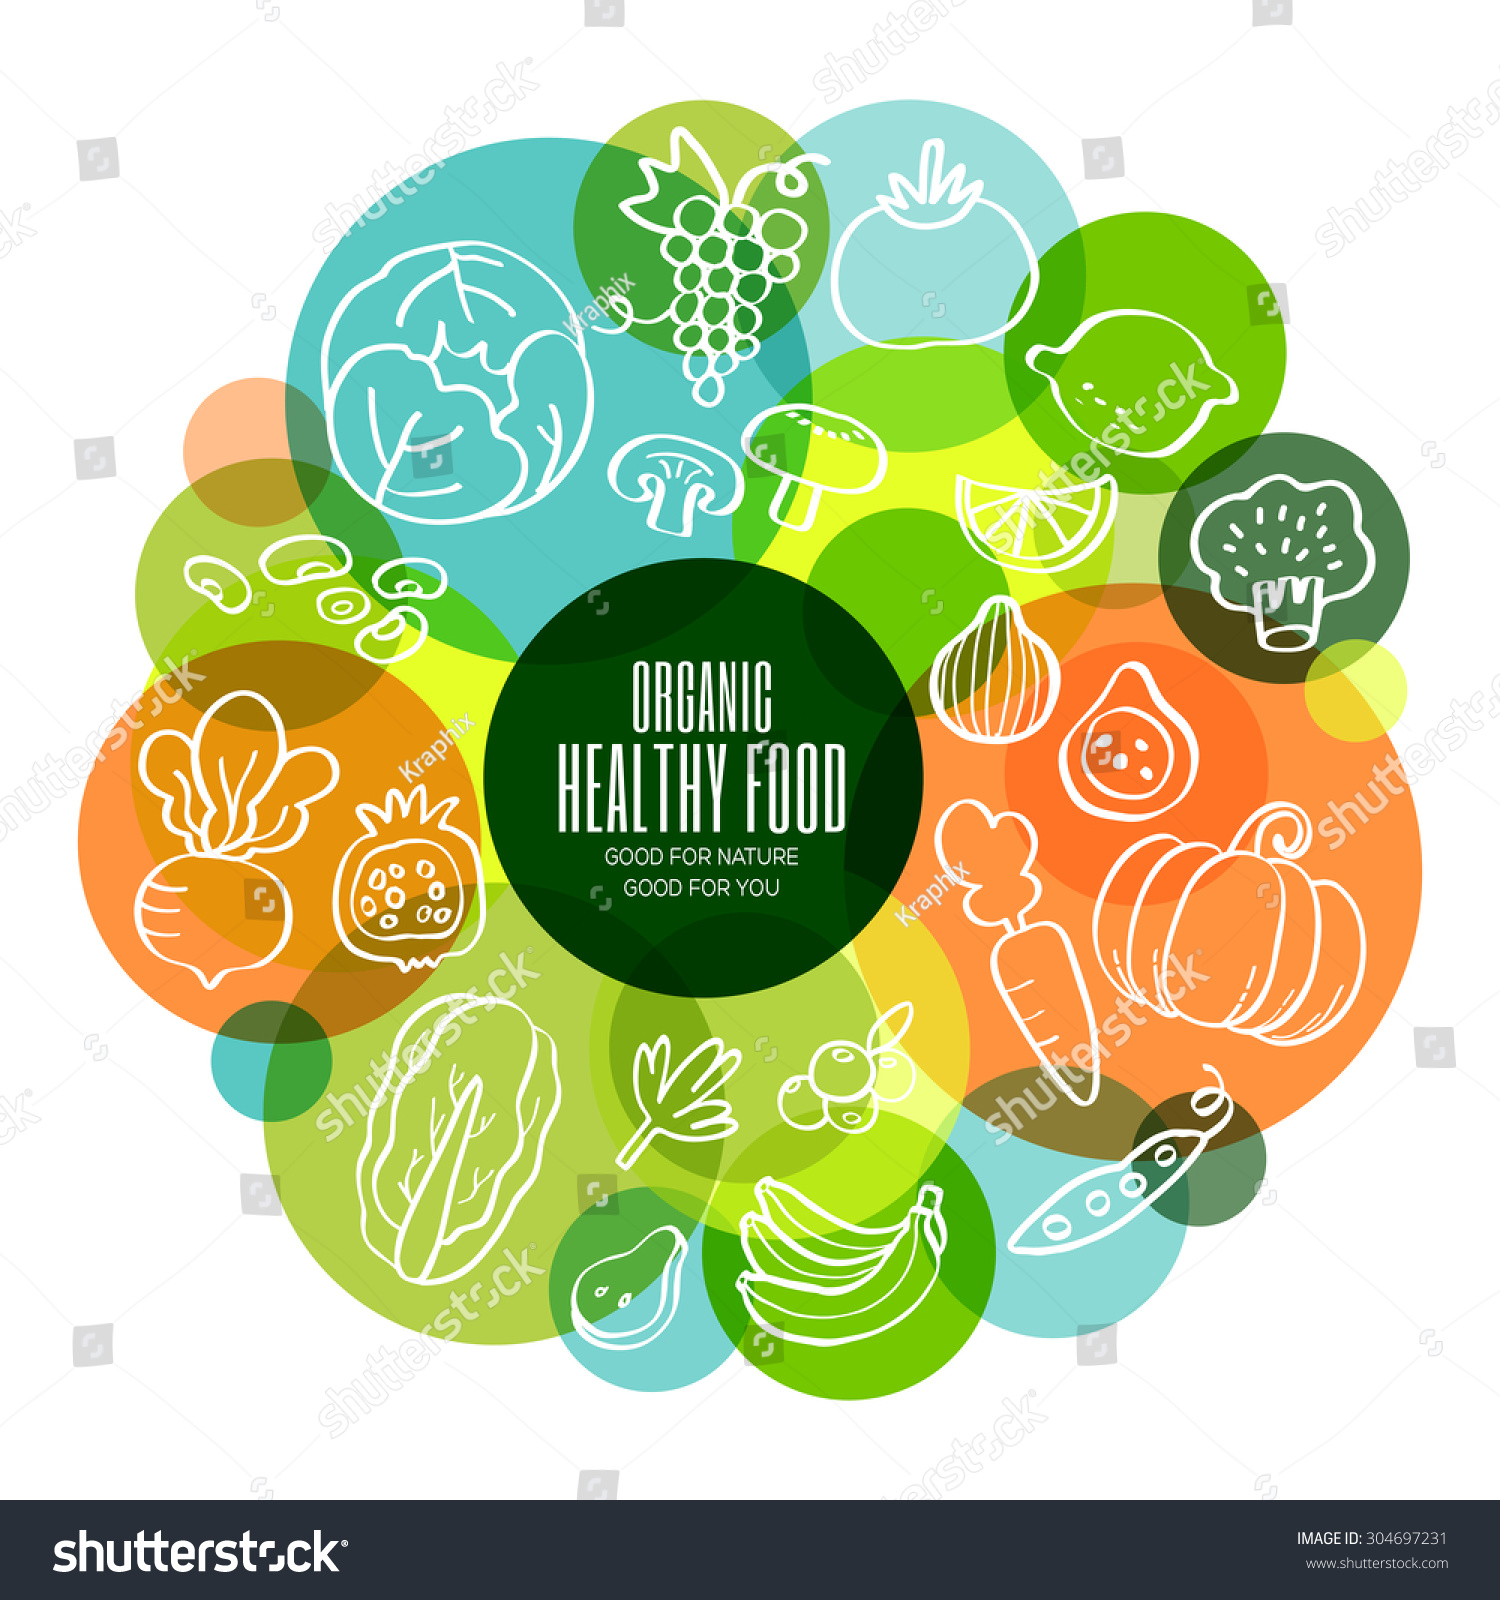 Organic healthy fruits and vegetables conceptual doodles illustration #304697231